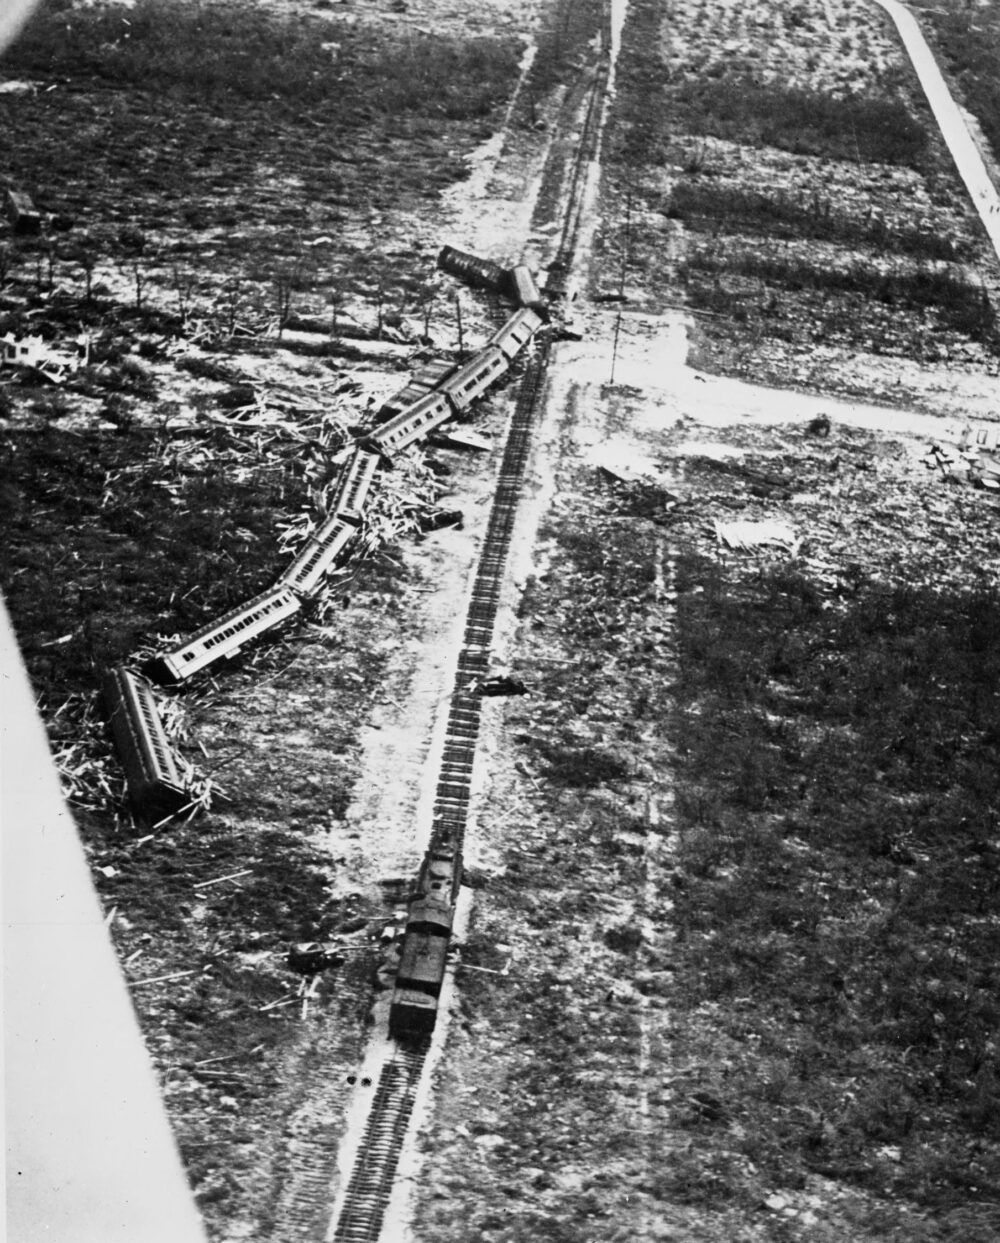 A grainy black and white image of a train crash next to a track, in an empty field. 